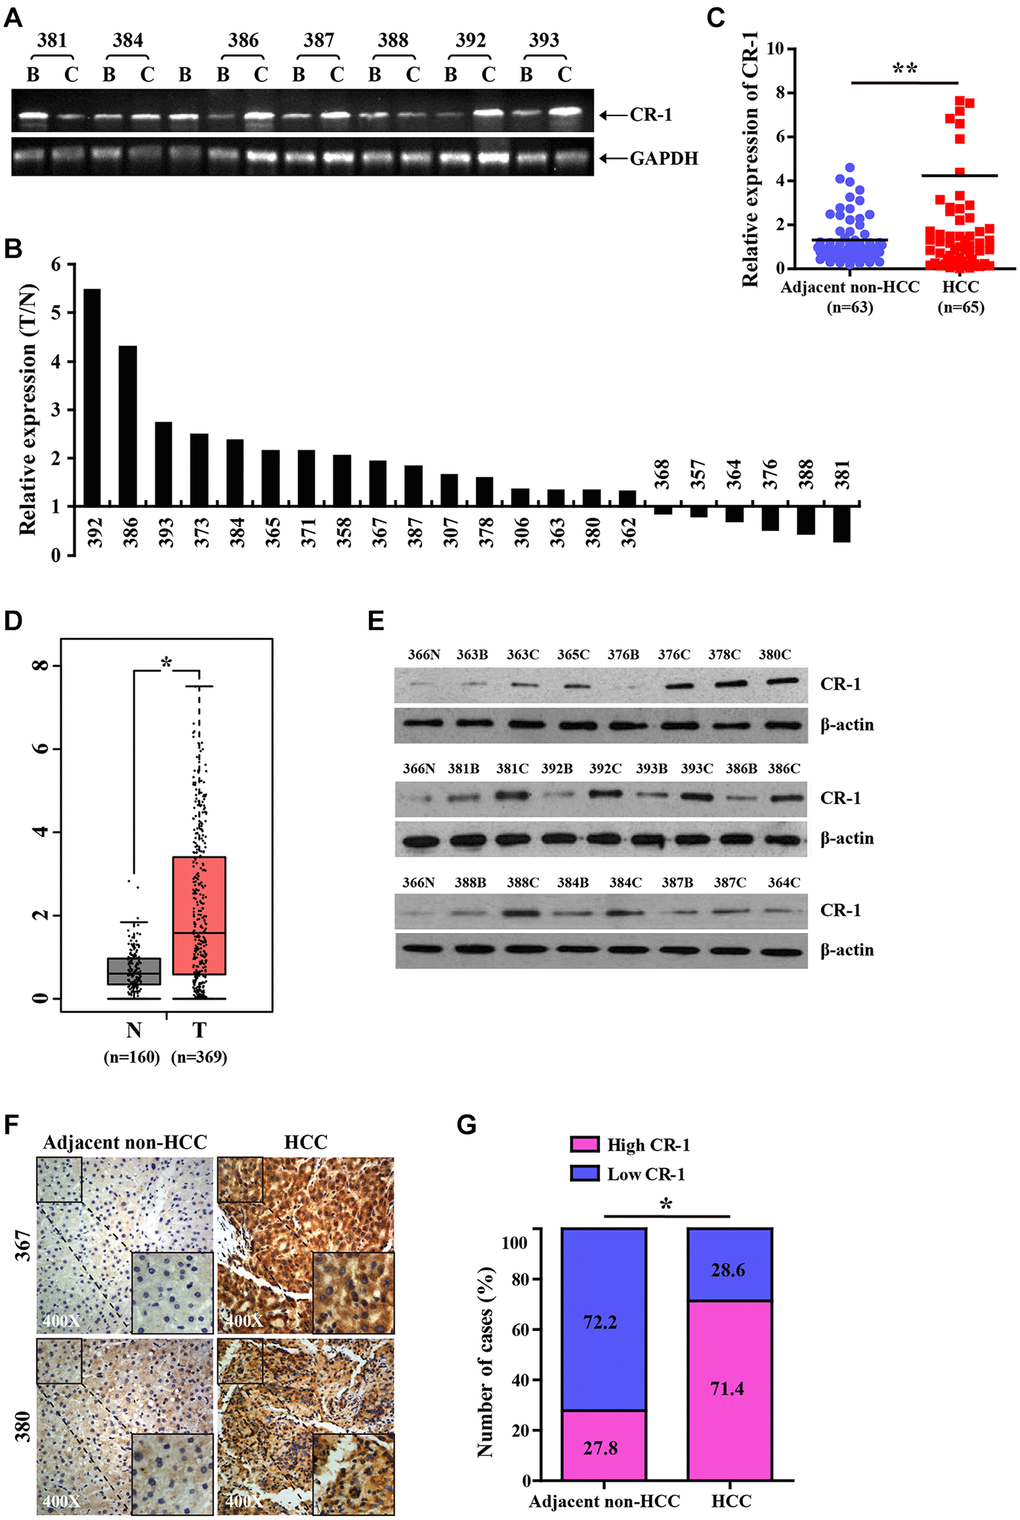 CR-1 expression is significantly upregulated in HCC tissues. (A) RT-PCR analysis of CR-1 transcript levels in HCC tissues (T) and matched adjacent non-tumor liver tissues (N). (B) The histogram plot shows ratio (T/N) of CR-1 mRNA levels in HCC (T) and matched non-tumor liver tissues (N) based on semi-quantitative analysis of RT-PCR data shown in Figure 2A. (C) qRT-PCR analysis shows relative levels of CR-1 transcript in 65 HCC (T) and 63 adjacent non-HCC liver tissue biopsies (N). (D) The expression levels of CR-1 transcript in HCC clinical specimens (T; n = 369) and non-cancerous liver tissue biopsies (N; n = 160) from TCGA datasets. (E) Representative western blot shows CR-1 protein expression levels in HCC (T) and adjacent non-HCC liver tissue biopsies (N). (F) Representative images show CR-1 protein expression in HCC and adjacent non-HCC liver tissue biopsies, as examined by IHC. (G) IHC assay analysis shows that CR-1 protein expression was significantly higher in majority of HCC tissues compared to the adjacent non-cancerous liver tissues (71.4% vs. 27.8%).